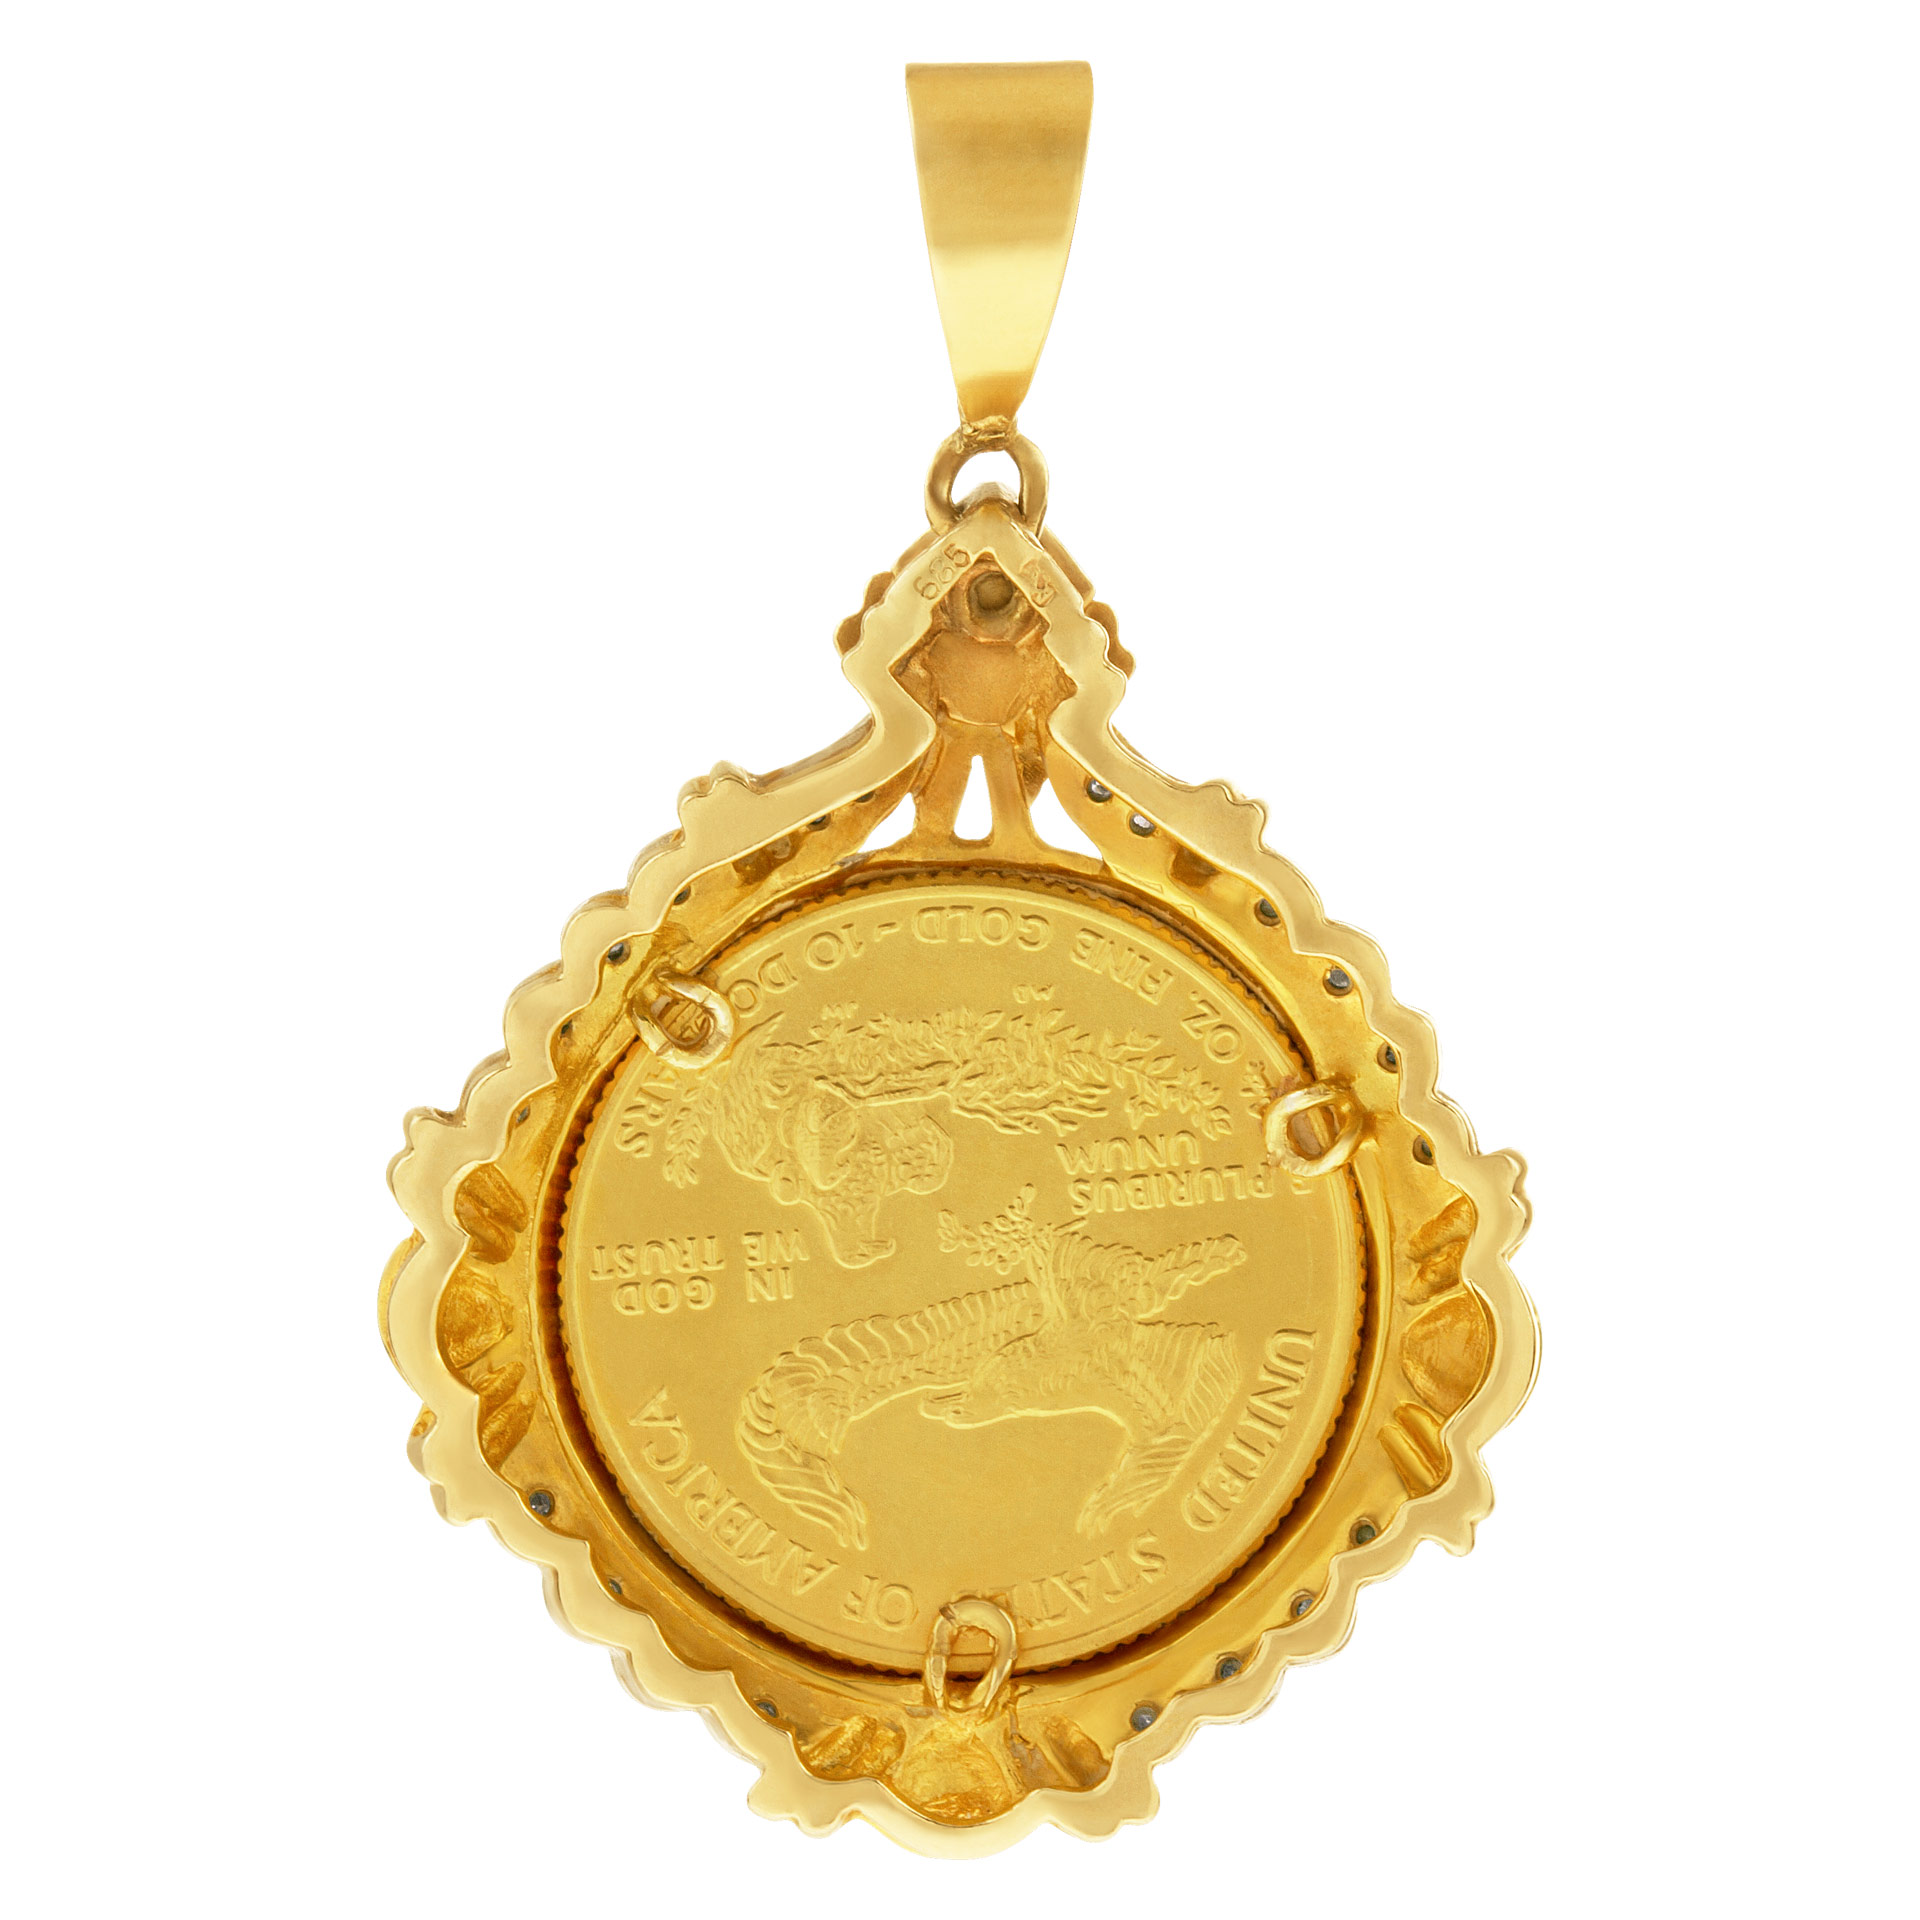 Eagle pendant $10 gold coin in 14k yellow gold and diamonds image 2